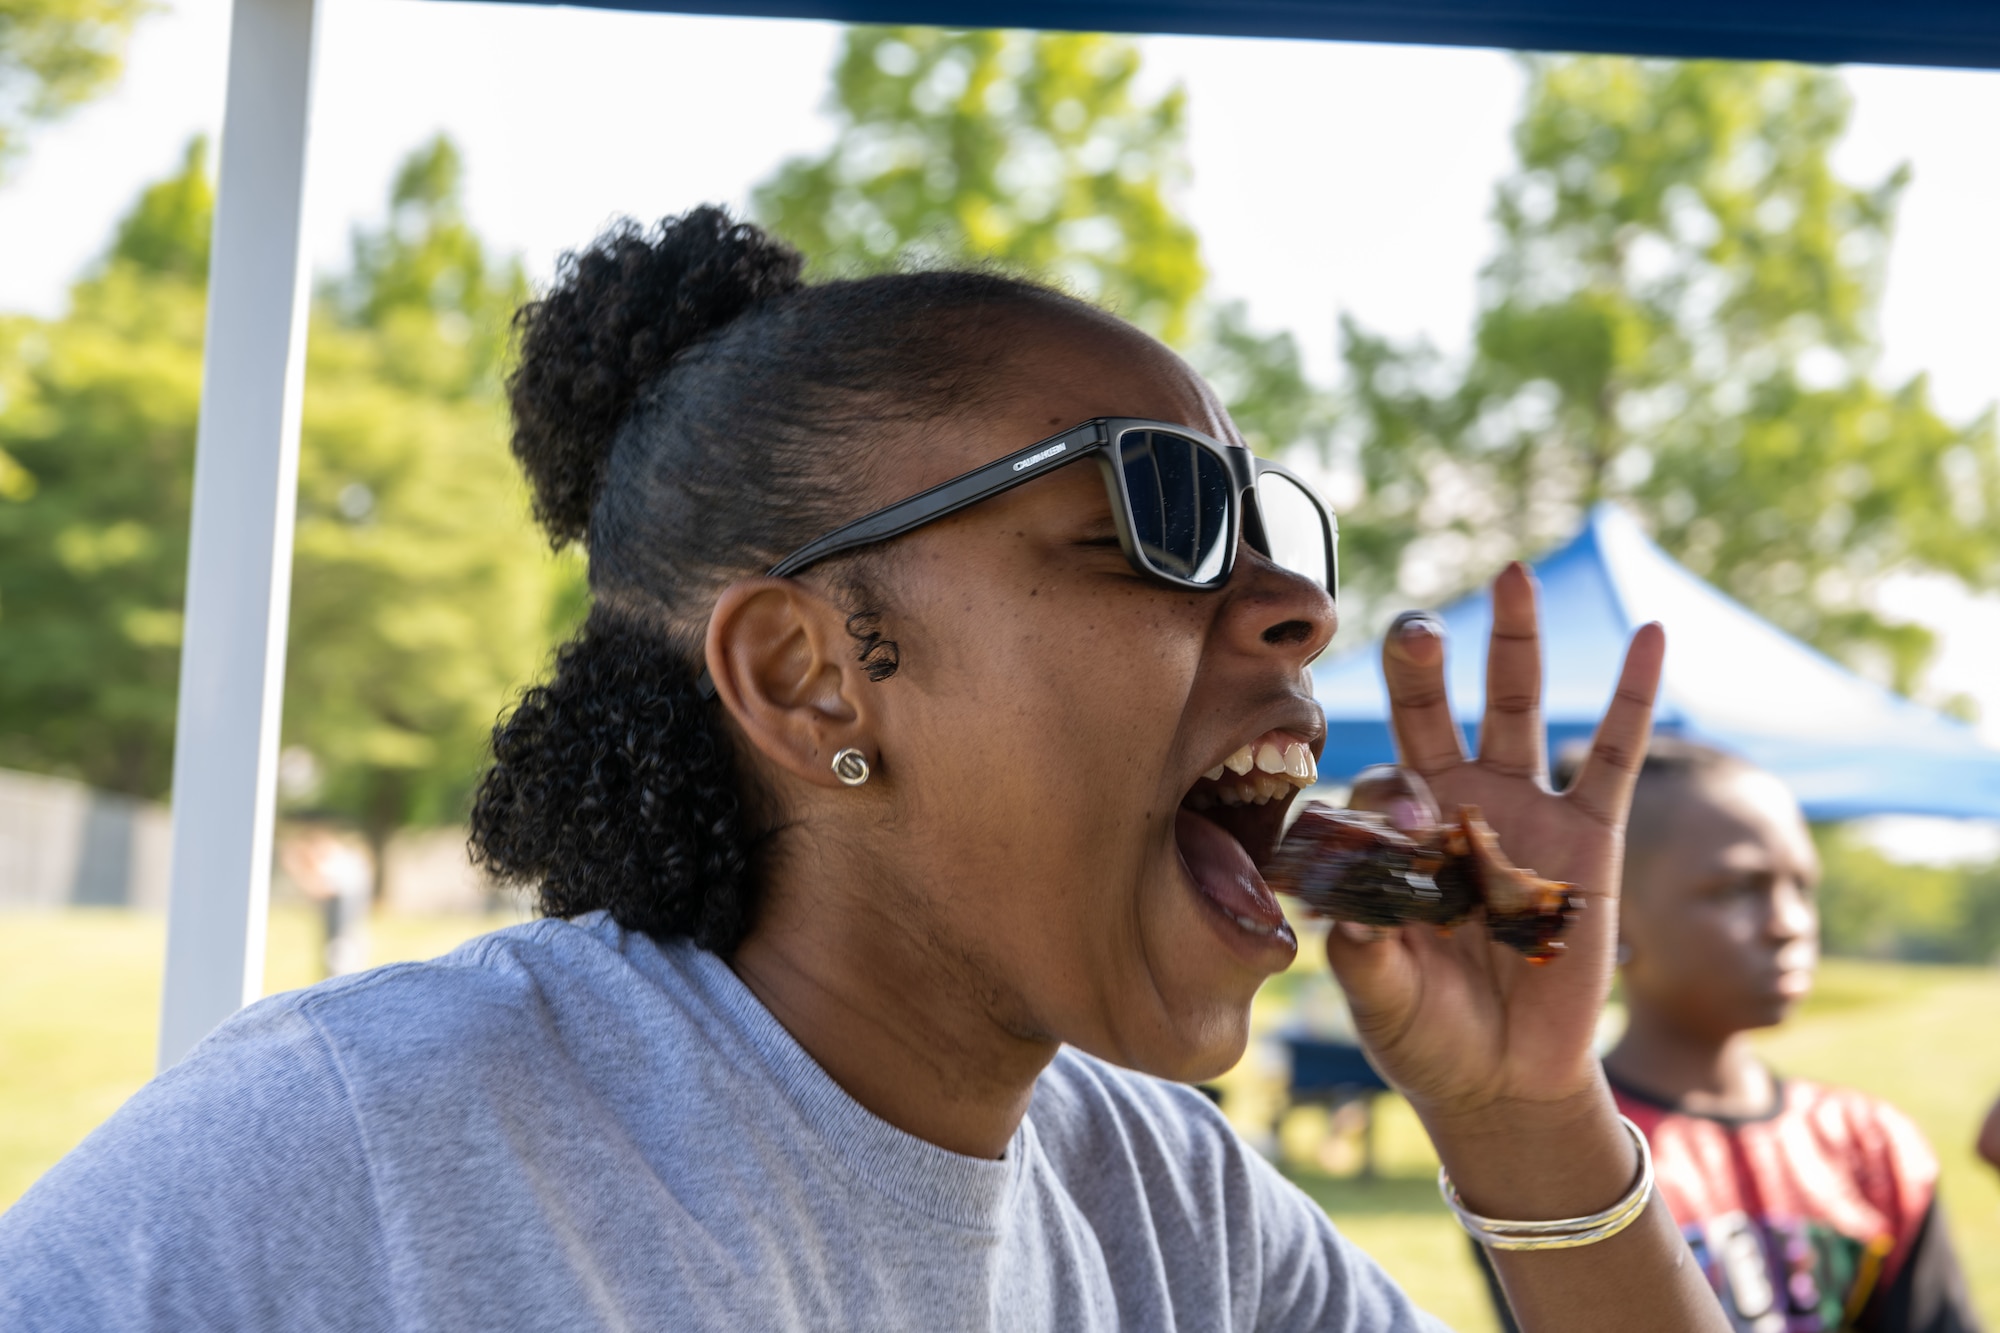 A judge for the grill masters competition tries a contestant’s rib during the Juneteenth Family Reunion event at Misawa Air Base, Japan, June 18, 2022.